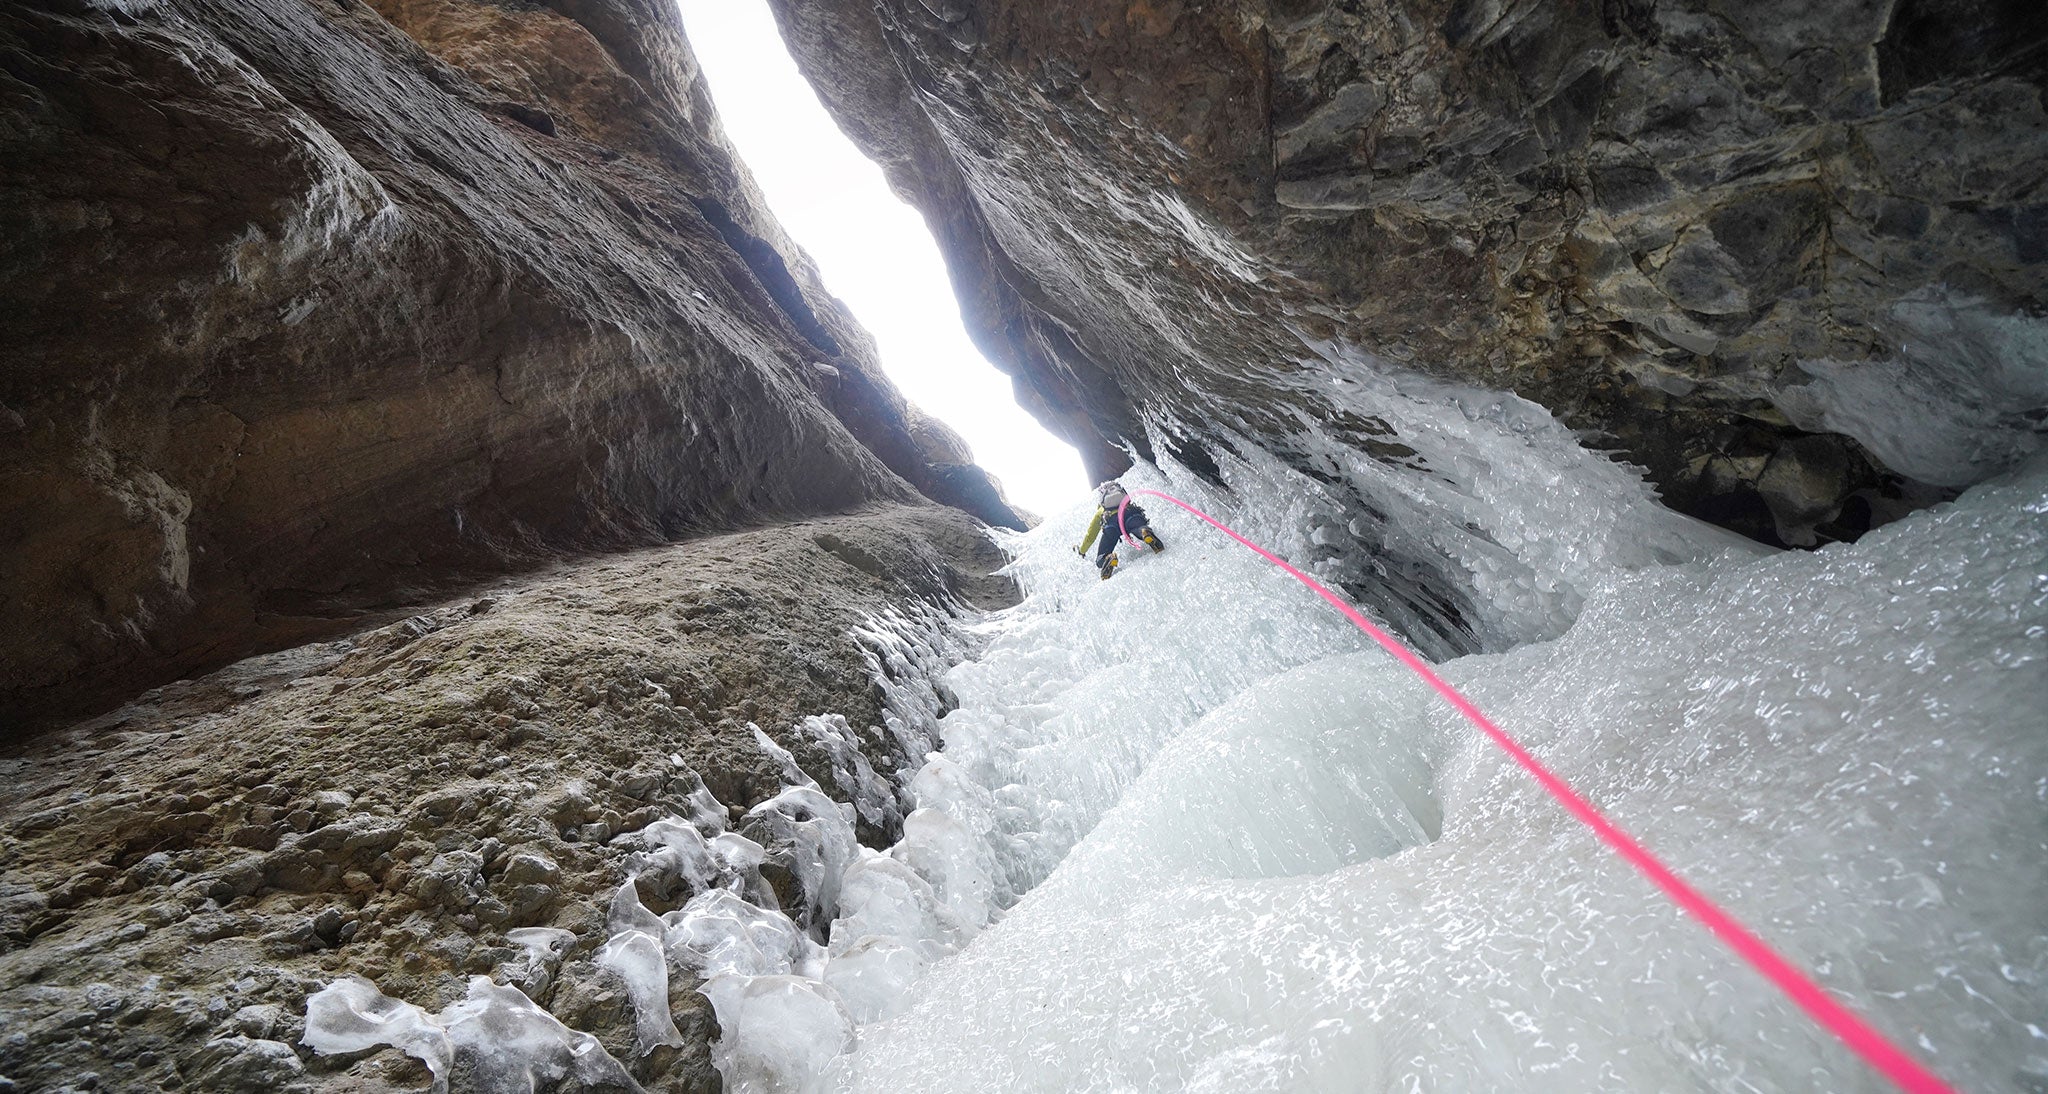 Belayer captures ice climber on a waterfall